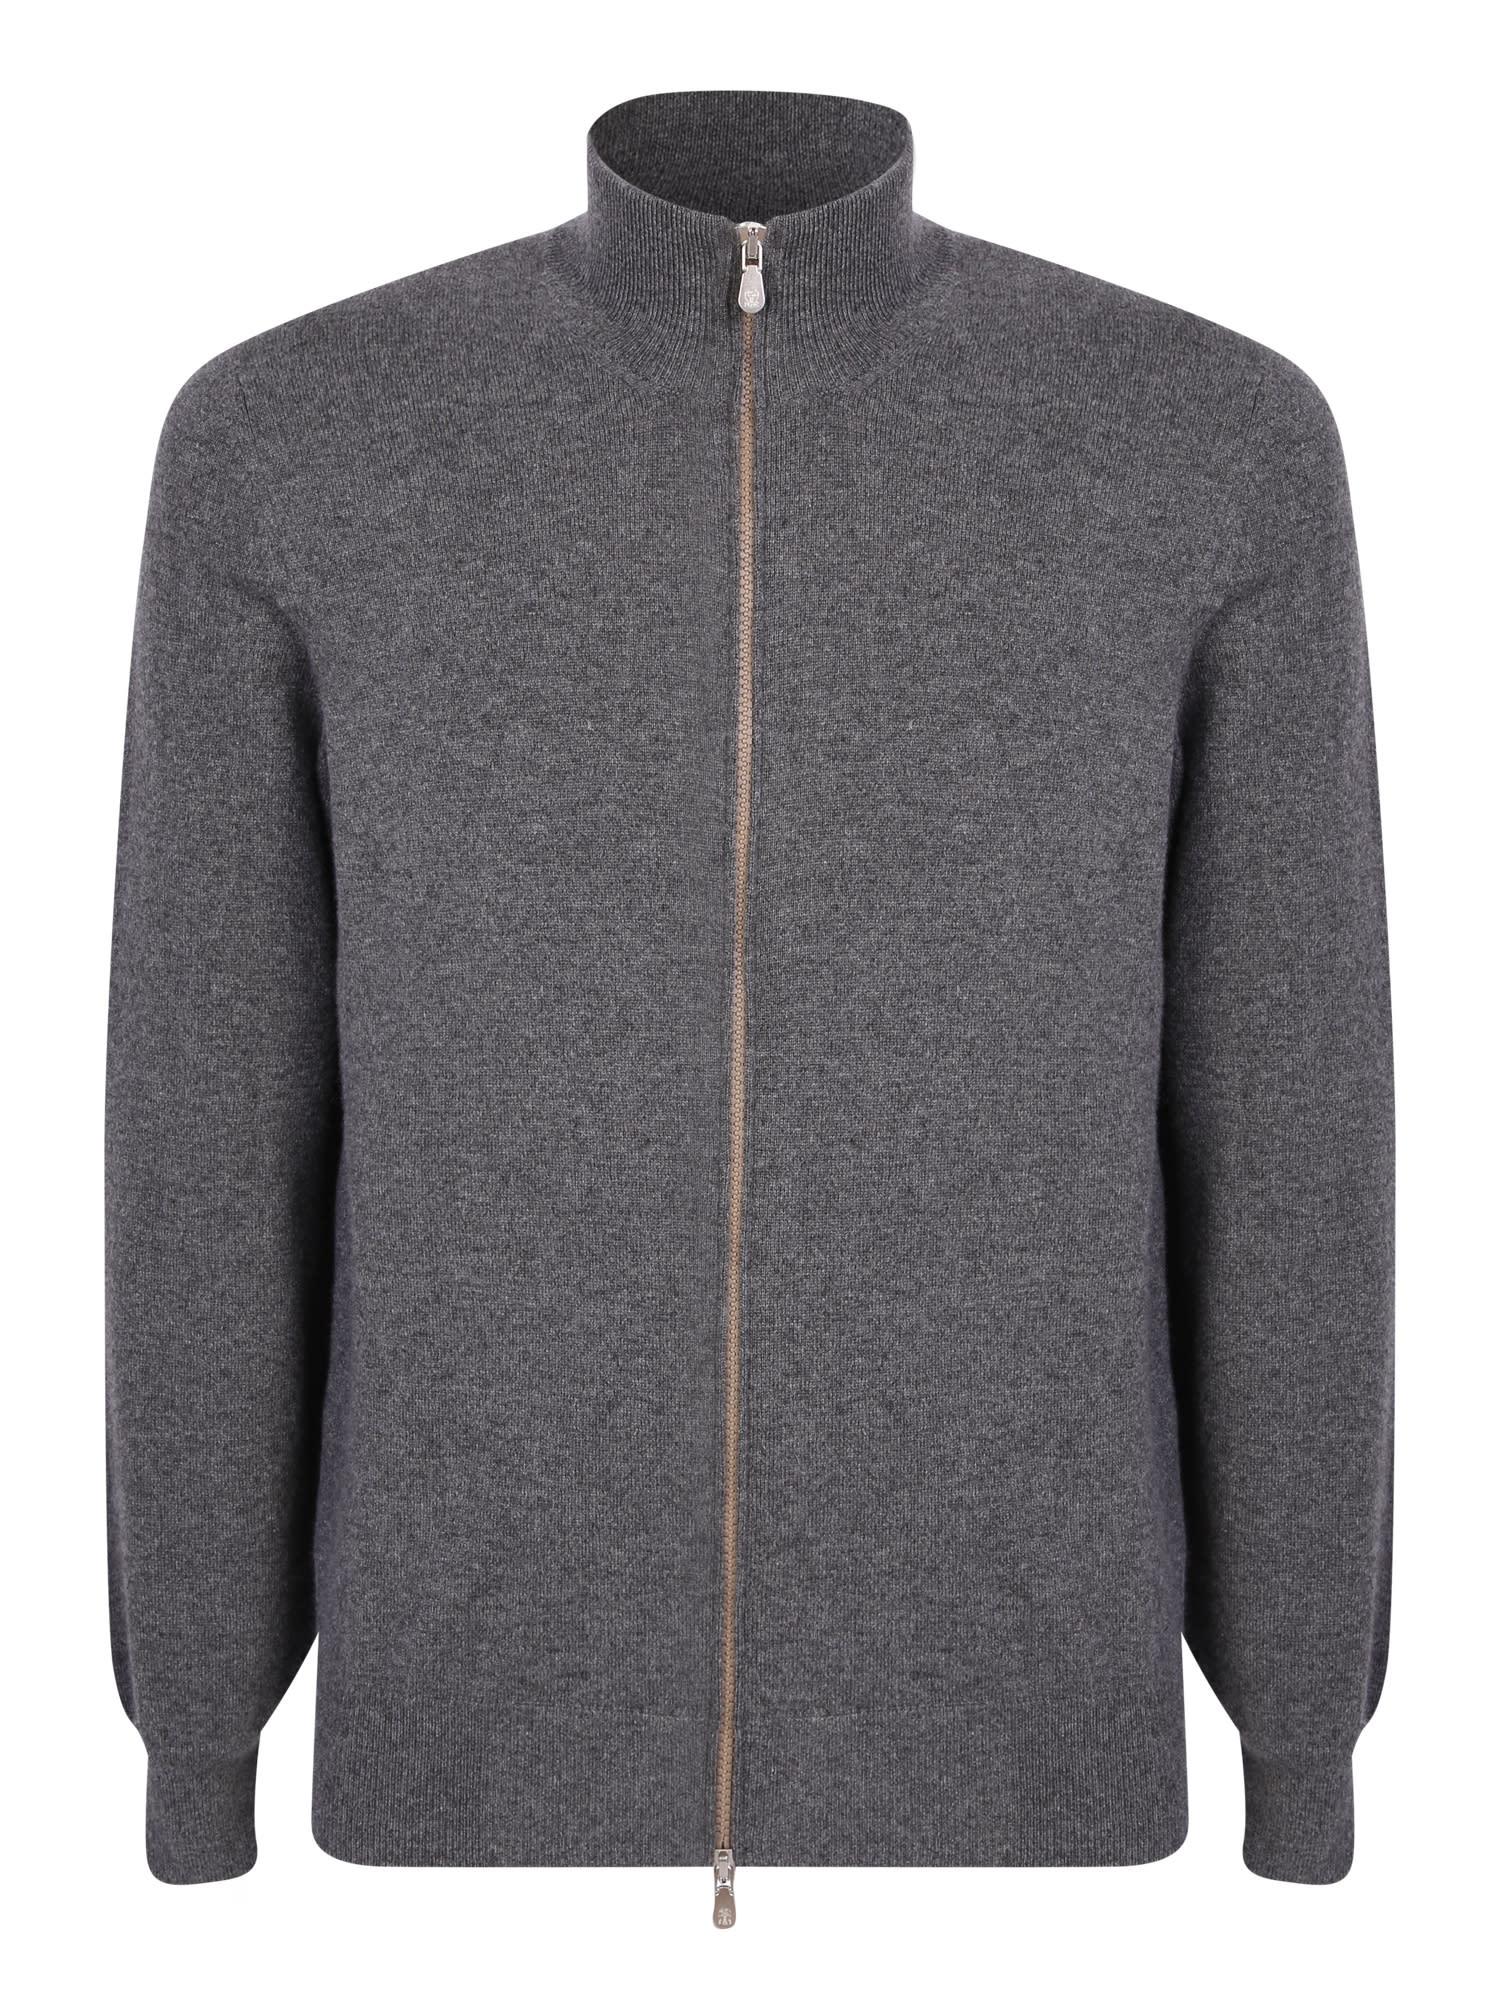 Grey Mens Clothing Sweaters and knitwear Zipped sweaters Brunello Cucinelli Cashmere Knit Zip Sweater in Grey for Men 